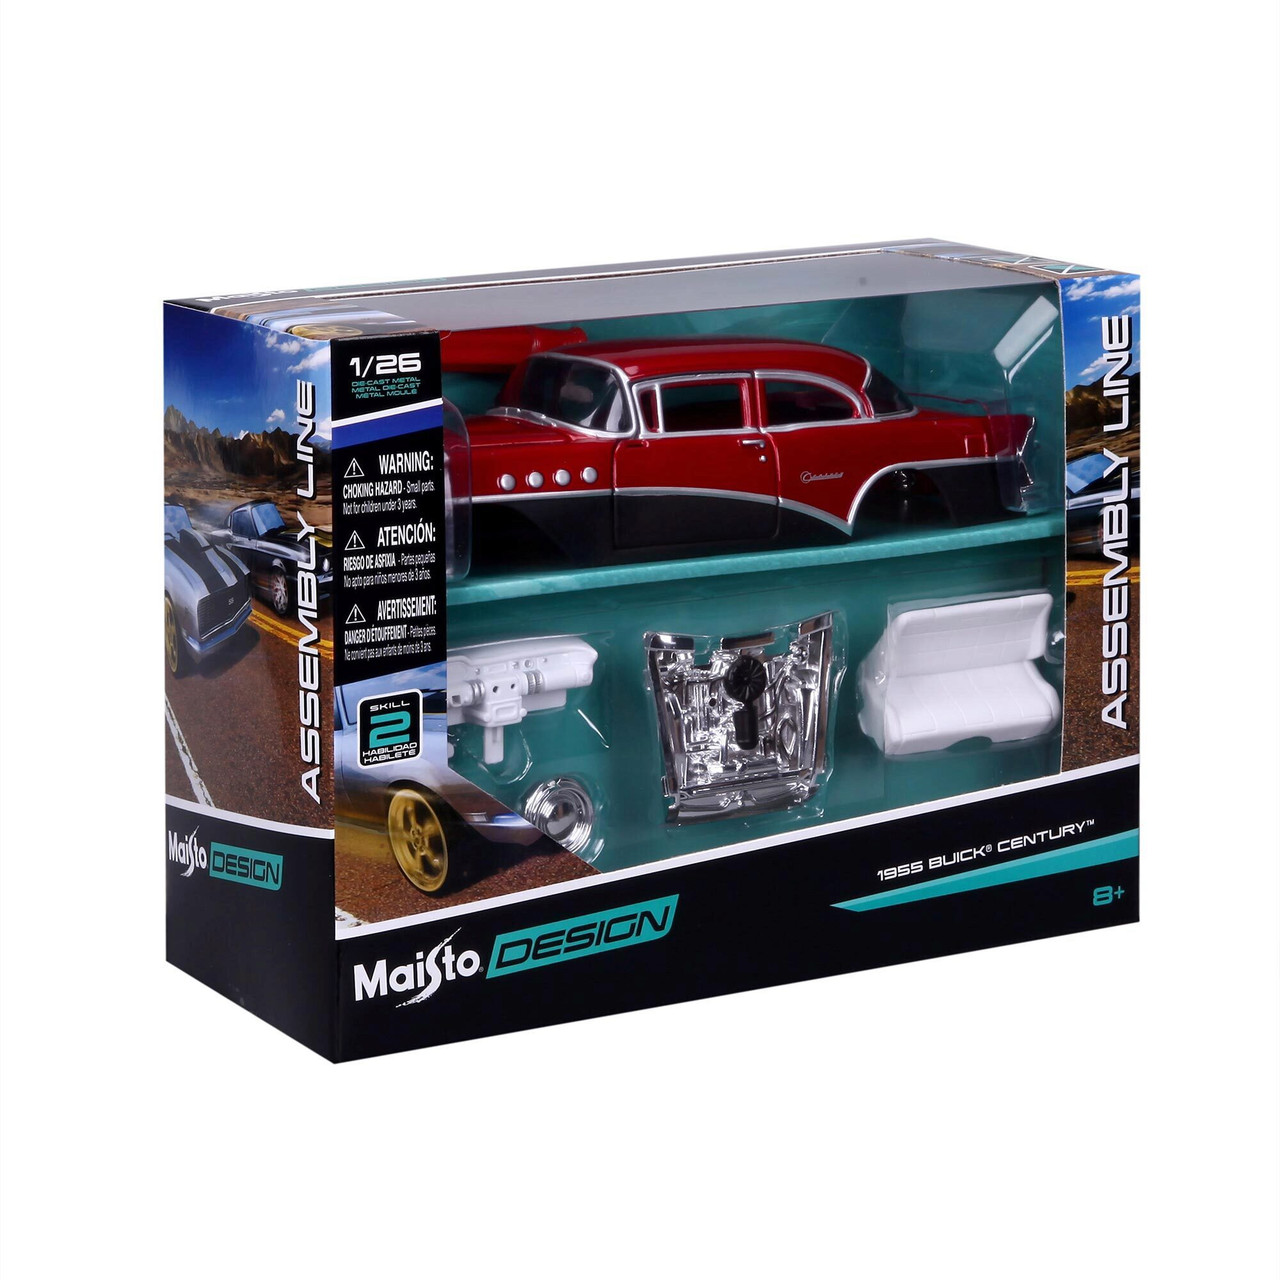  Maisto 1:26 Scale 1955 Buick Century Diecast Vehicle (Styles  May Vary), Black, White : Arts, Crafts & Sewing